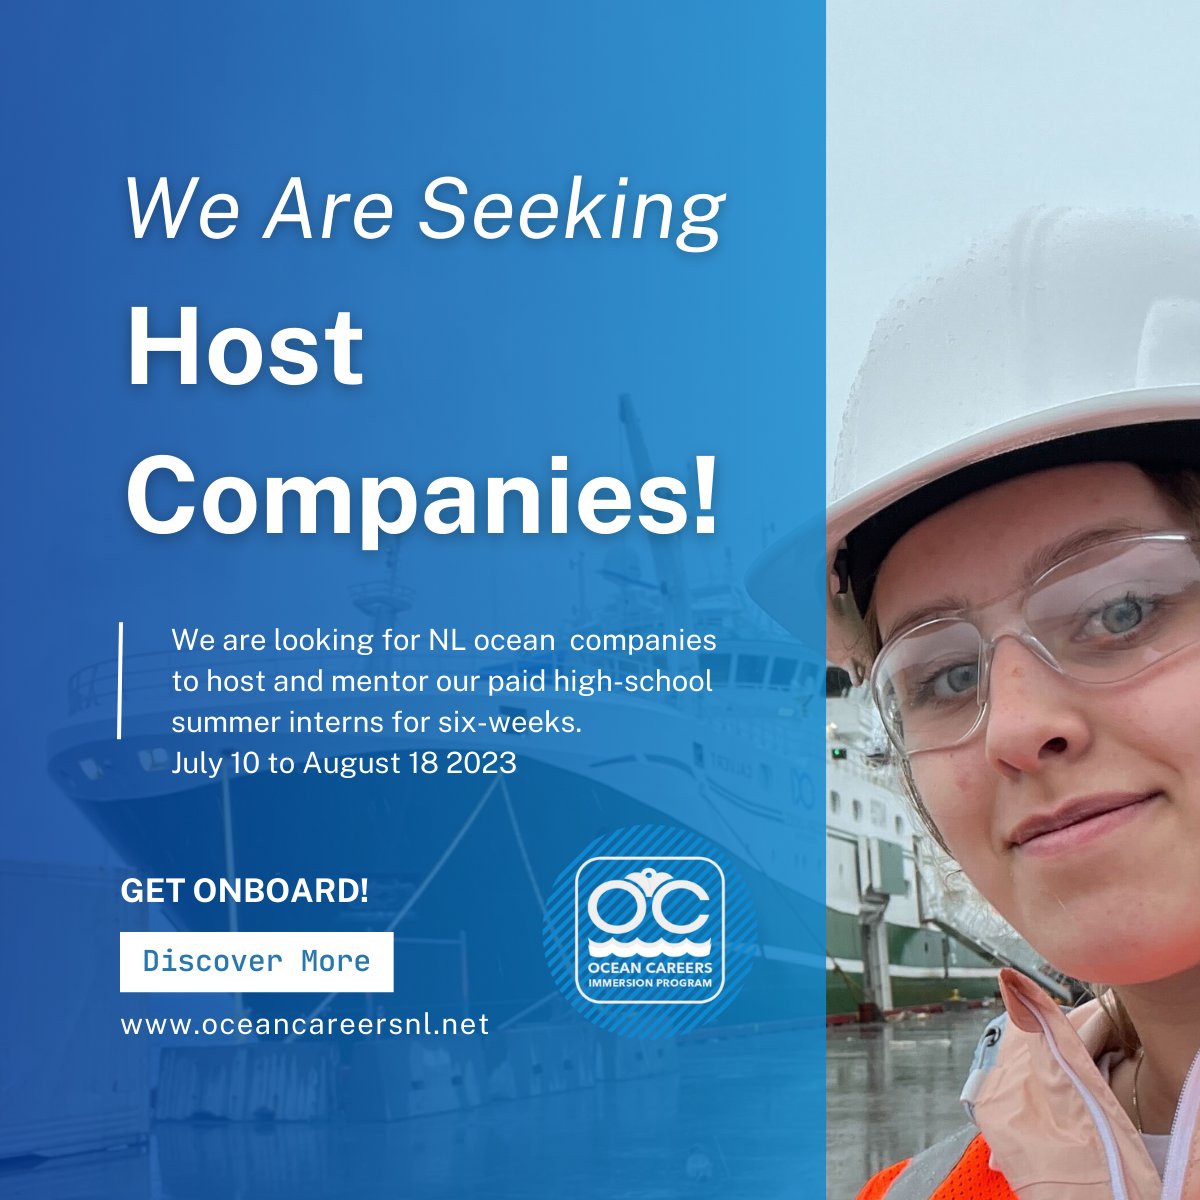 We are seeking host companies for our Summer 2023 High School Internship program. 100% funded six-week on-site placements. July 10 - August 2023. Find out more: oceancareersnl.net Complete the Expression of Interest: forms.gle/TxnxwvBGrB9PzX…